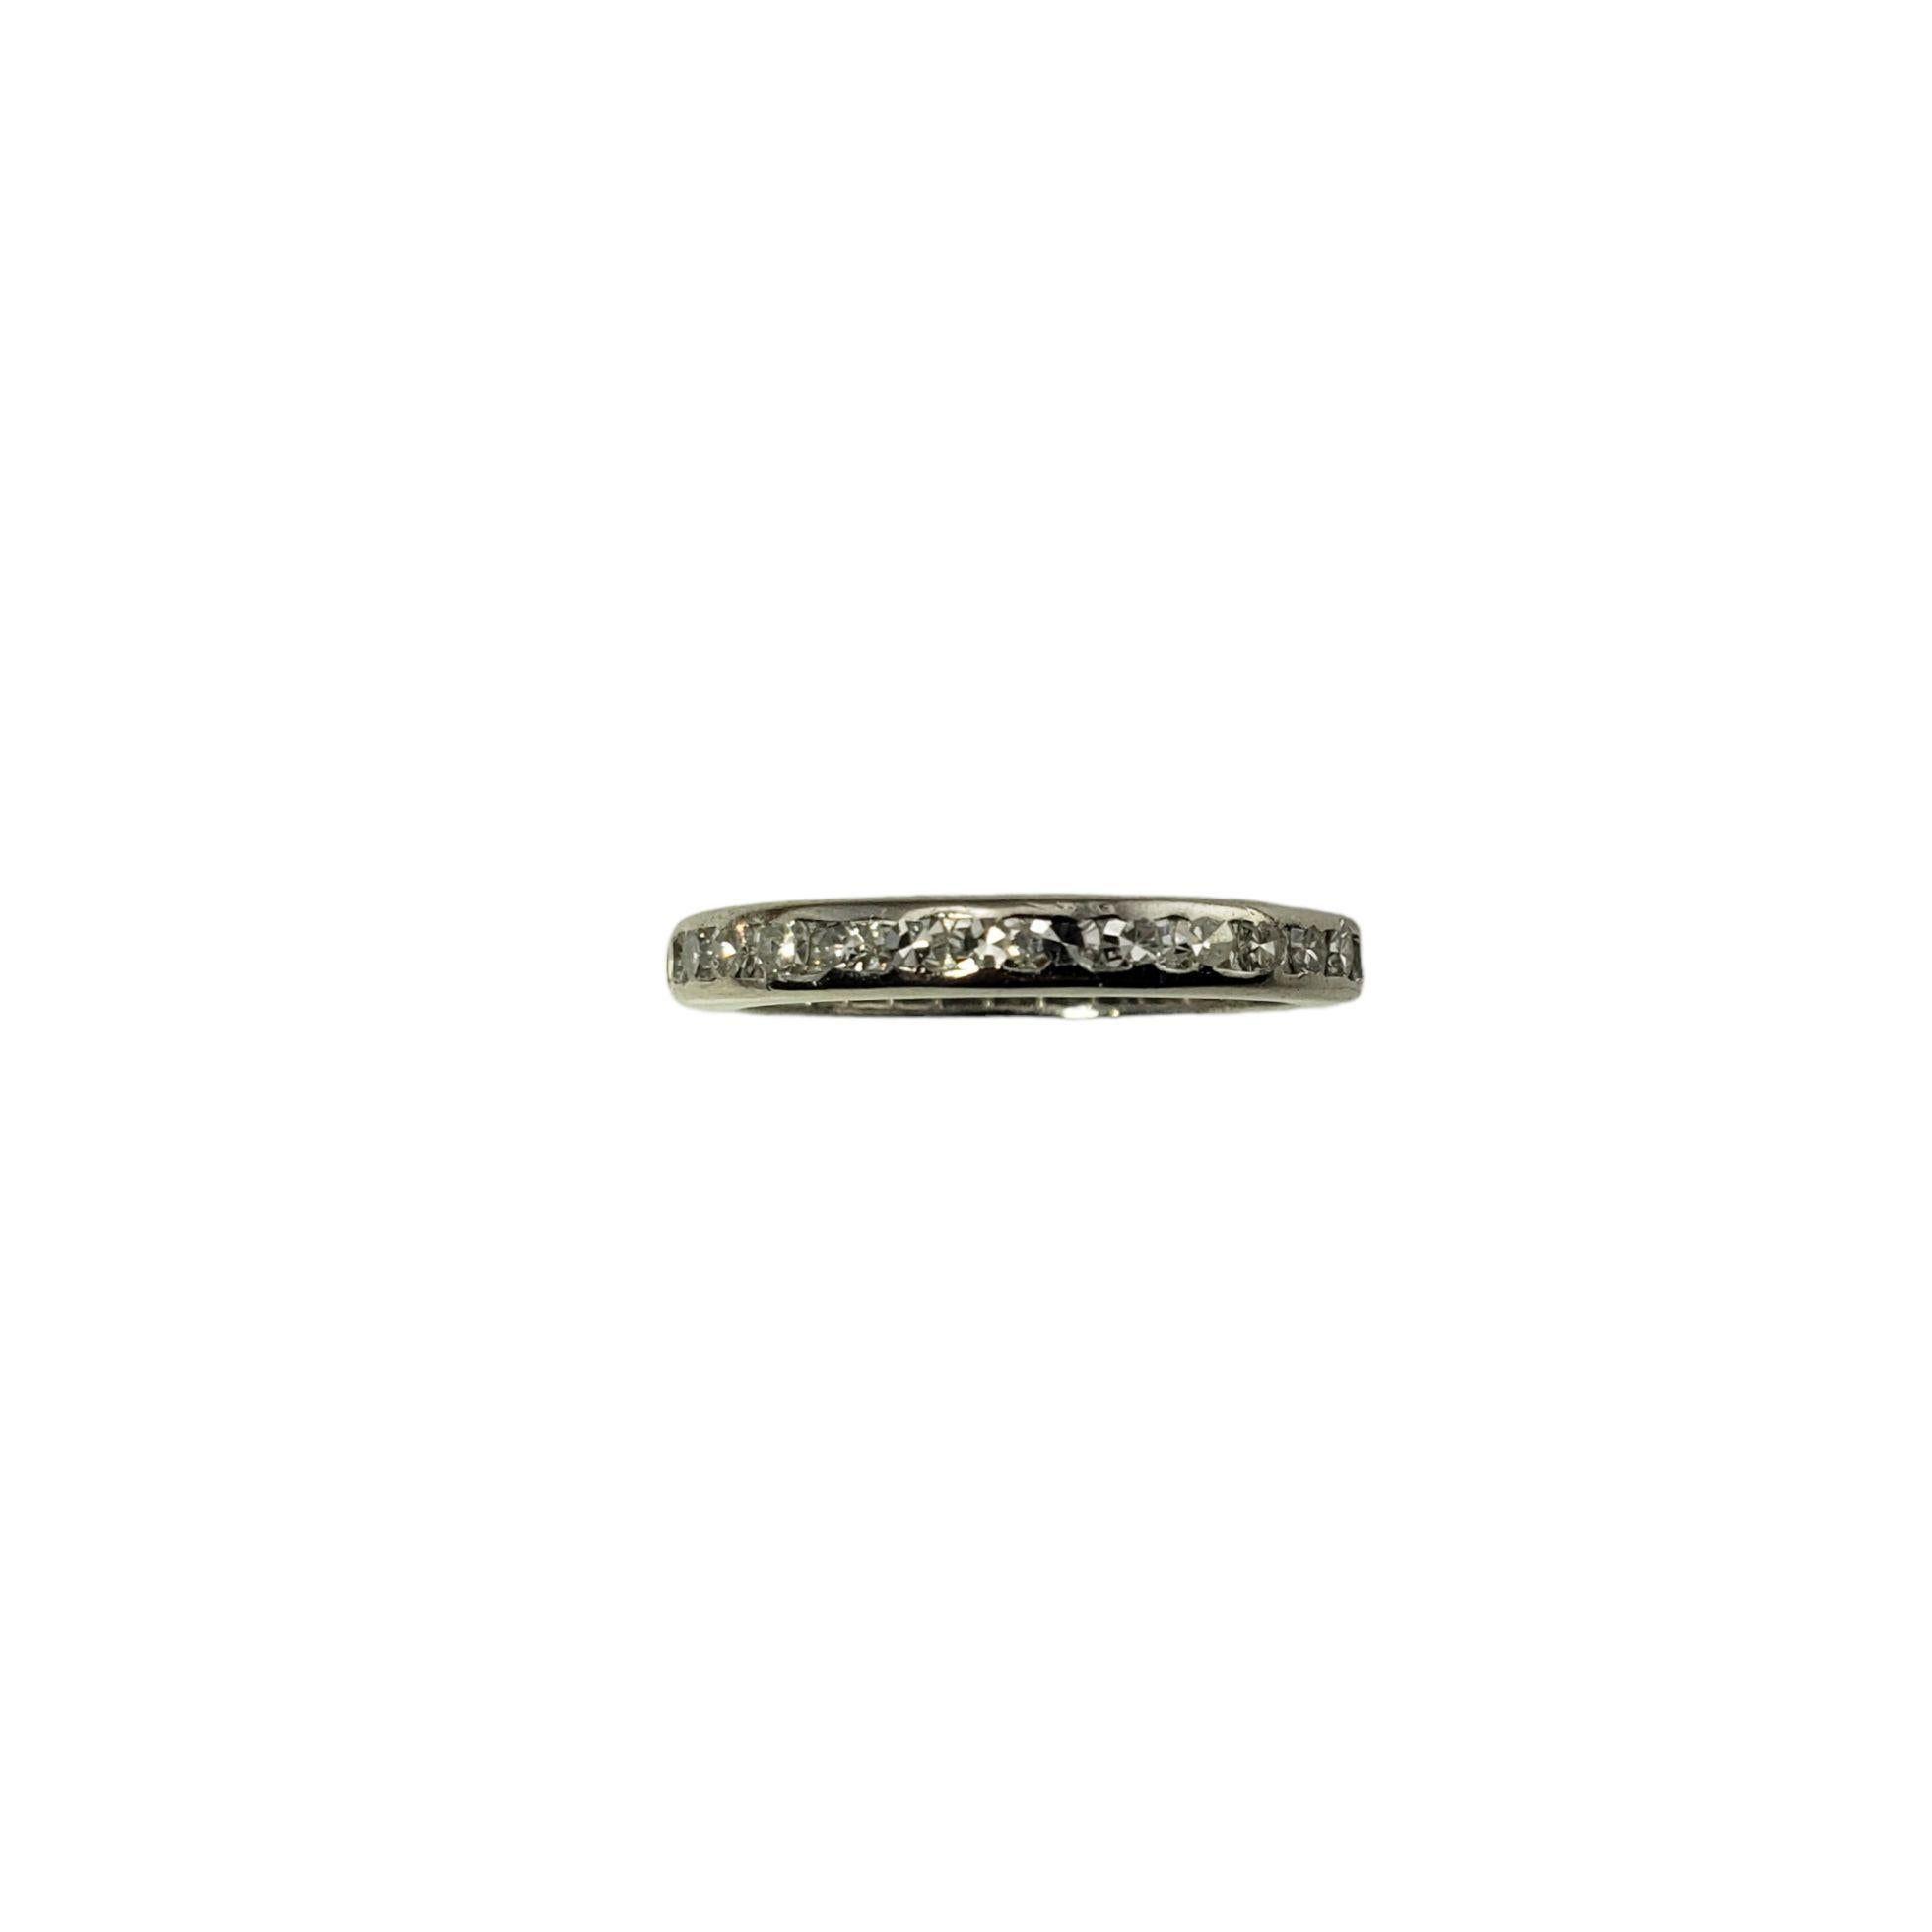 Vintage 14 Karat White Gold Diamond Eternity Band Ring Size 6-

This sparkling band features 31 round single cut diamonds set in classic 14K white gold. Width: 3 mm.

Approximate total diamond weight: .93 ct.

Diamond clarity: SI1-VS2

Diamond